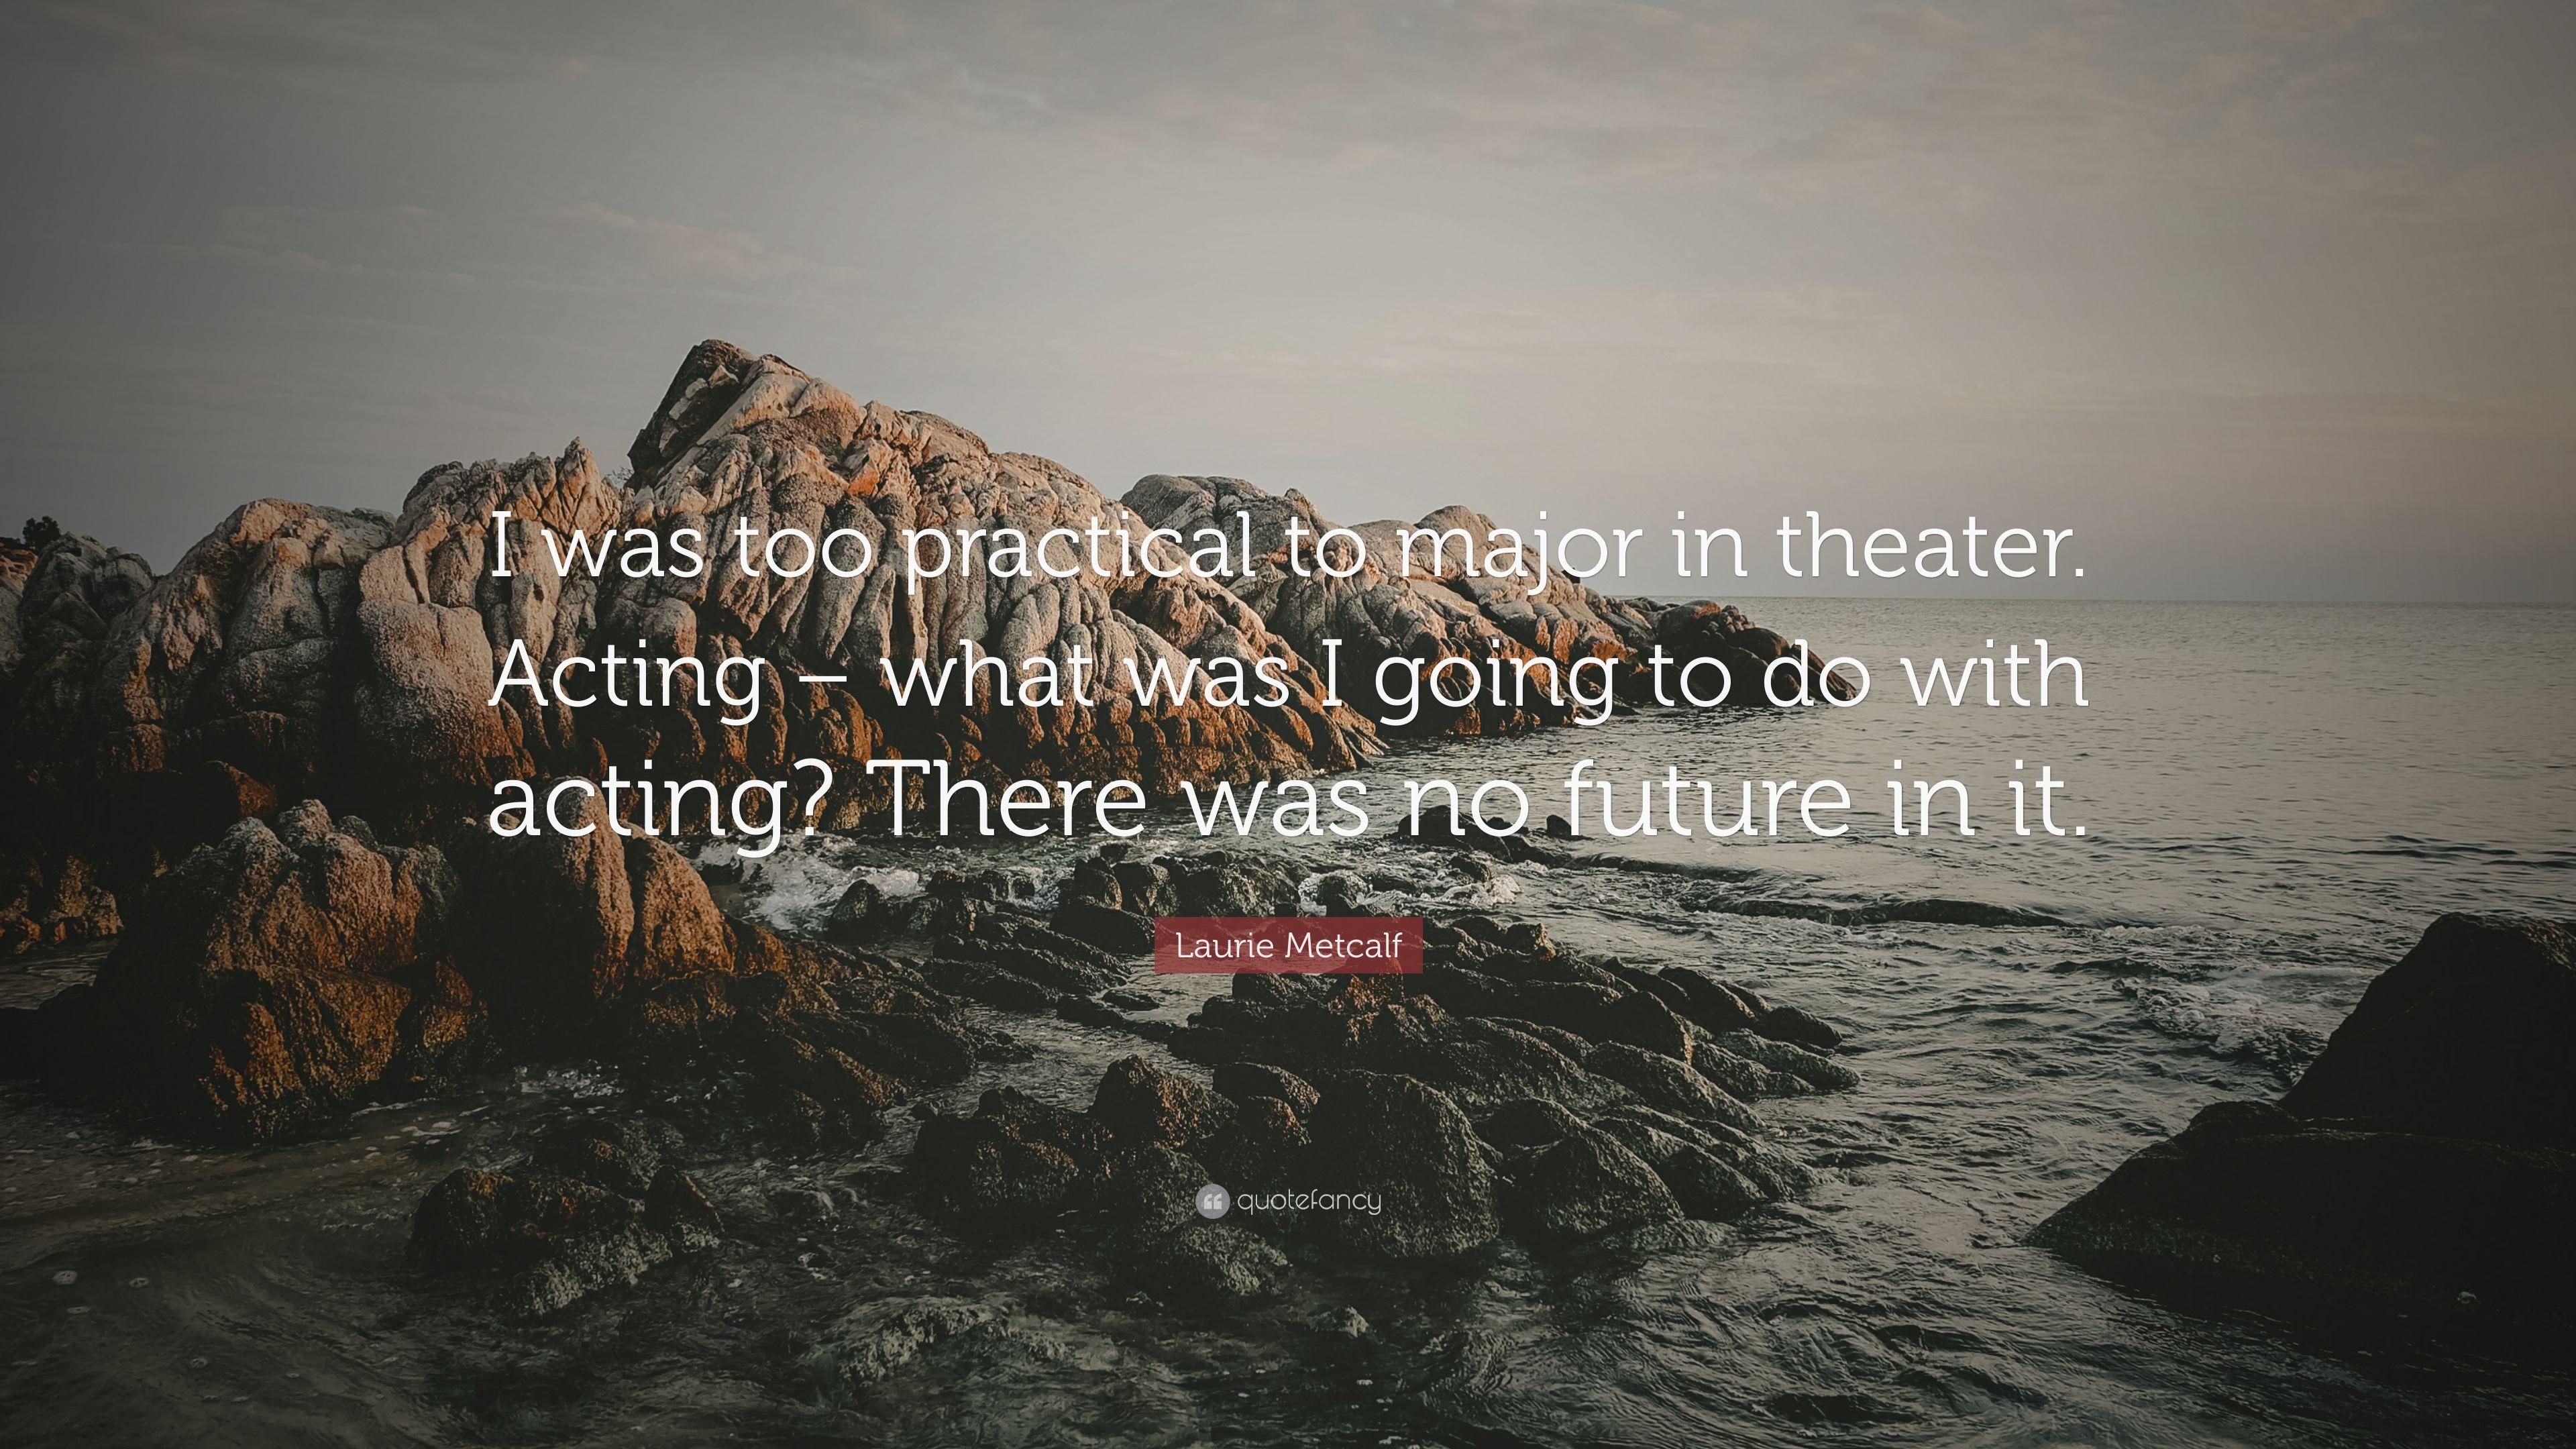 Laurie Metcalf Quote: “I was too practical to major in theater